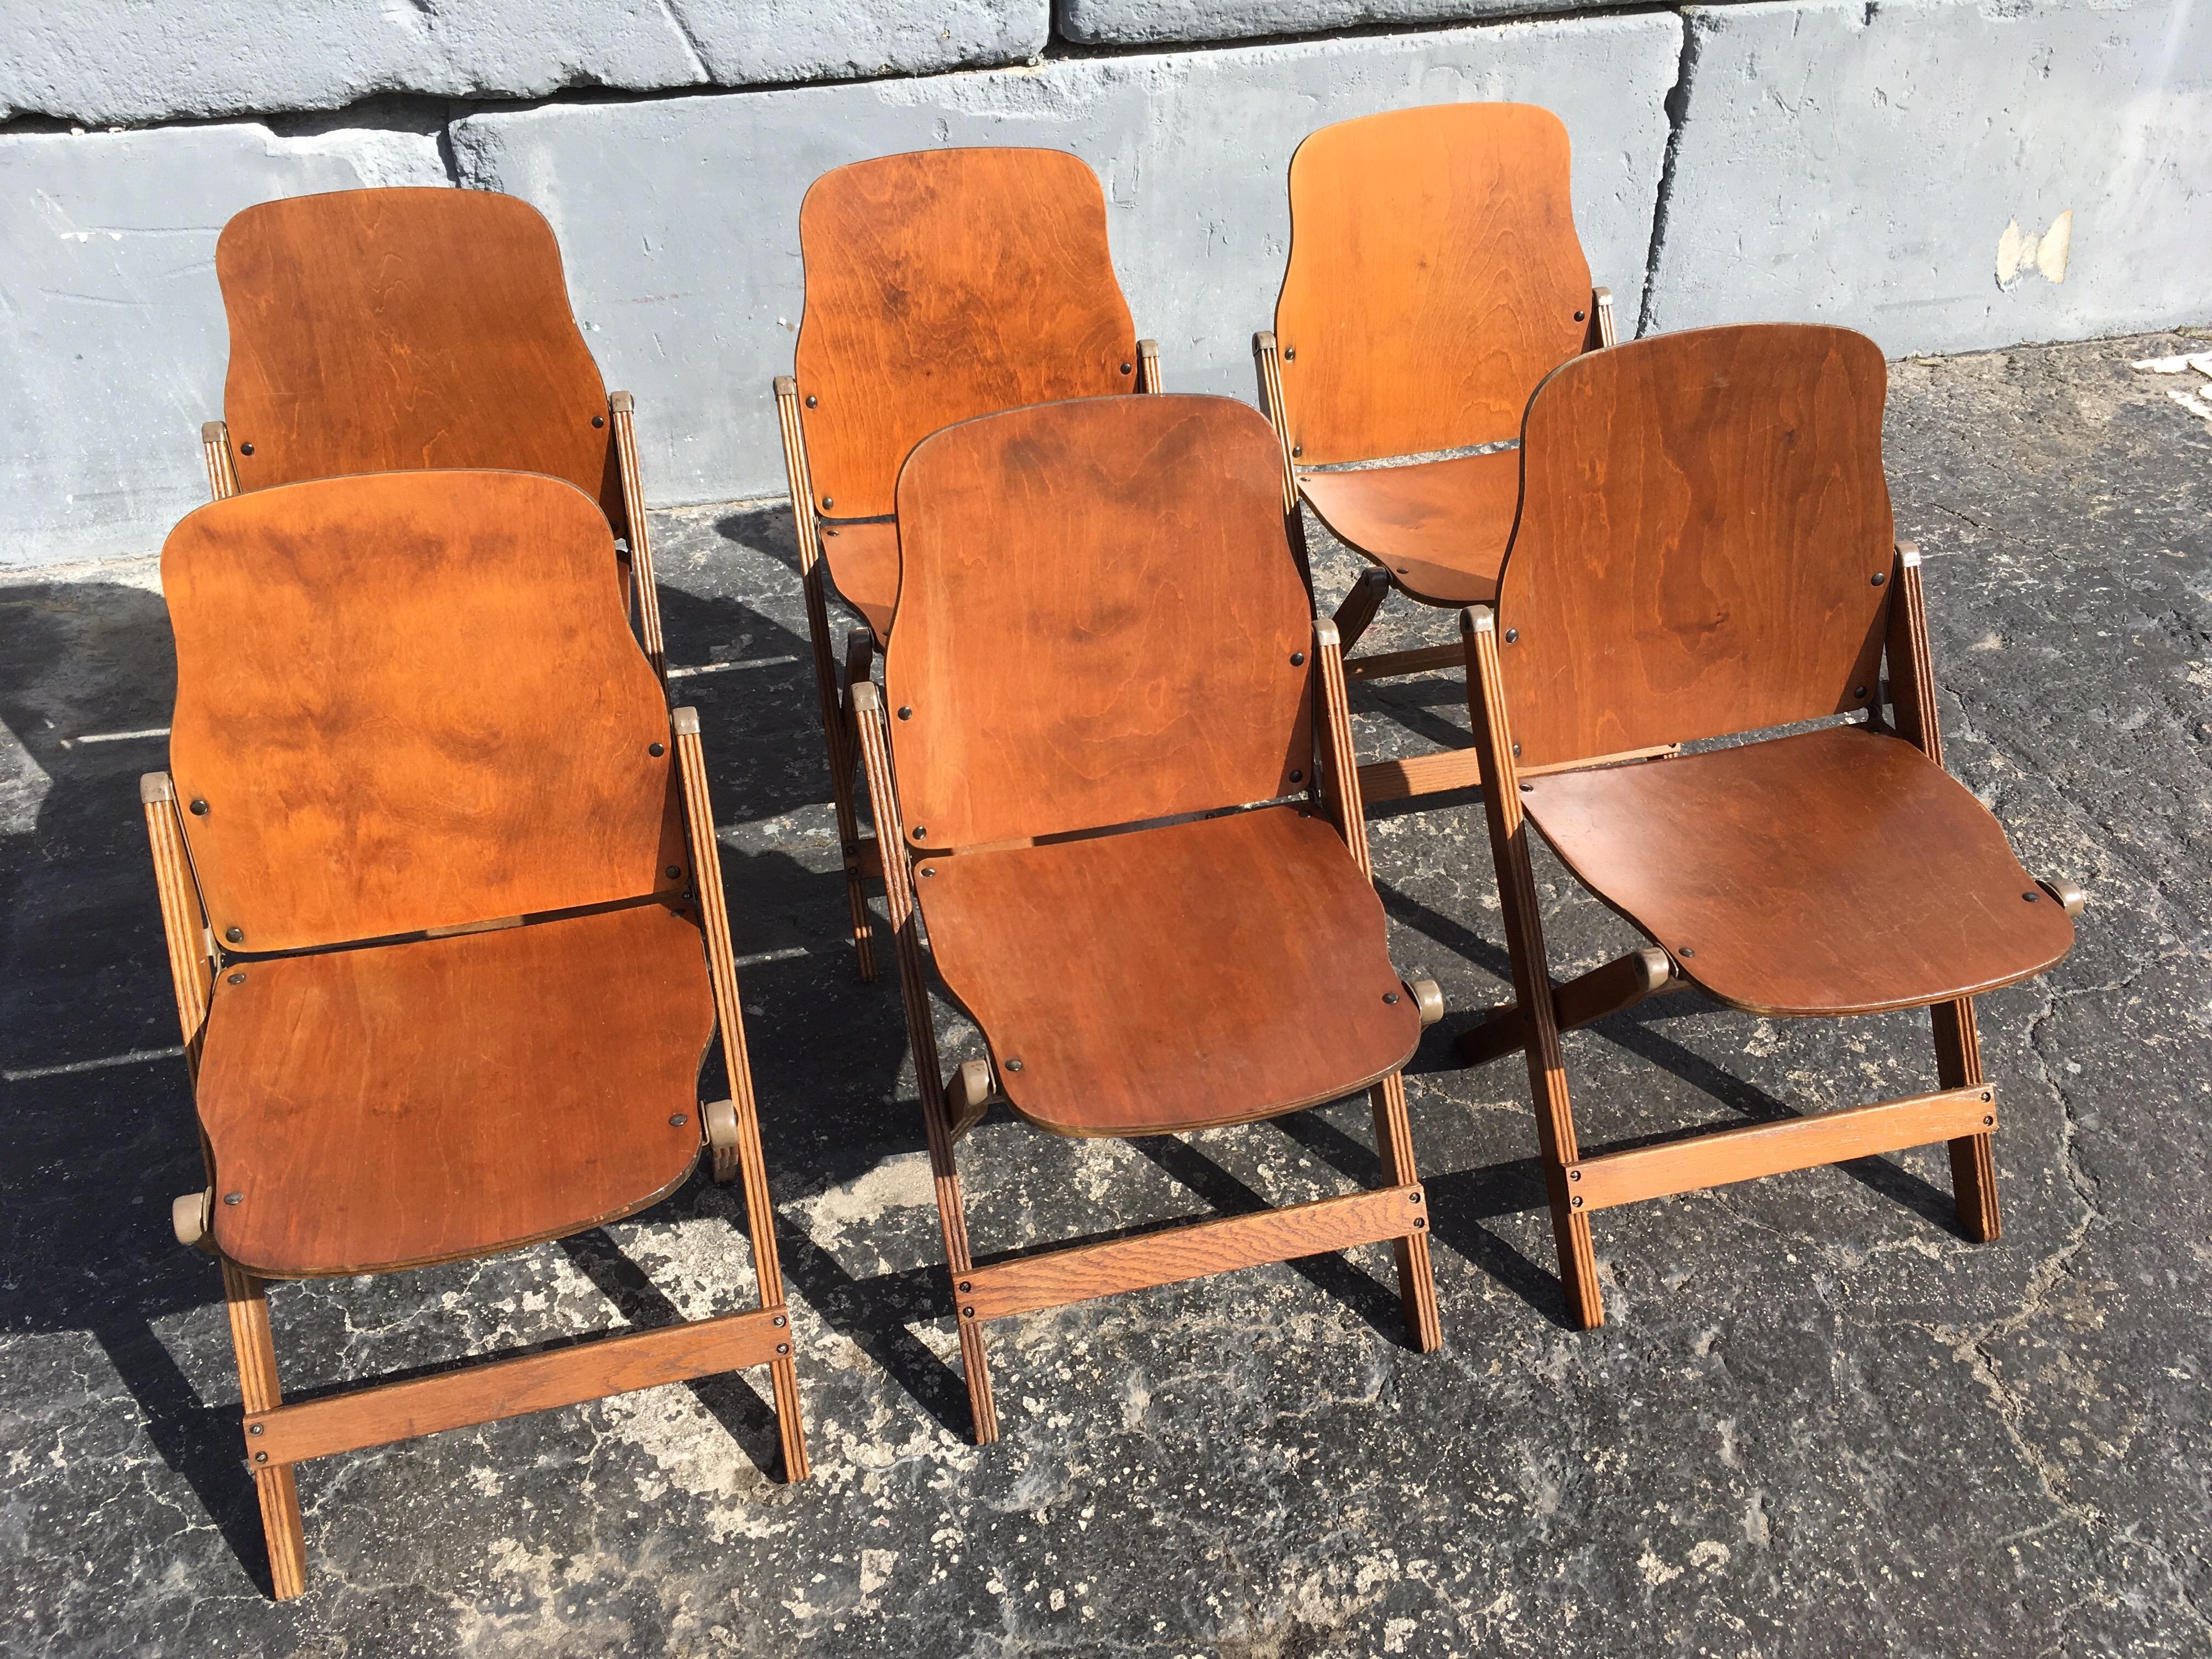 Mid-20th Century Set of Six Great Vintage Wood Folding Chairs